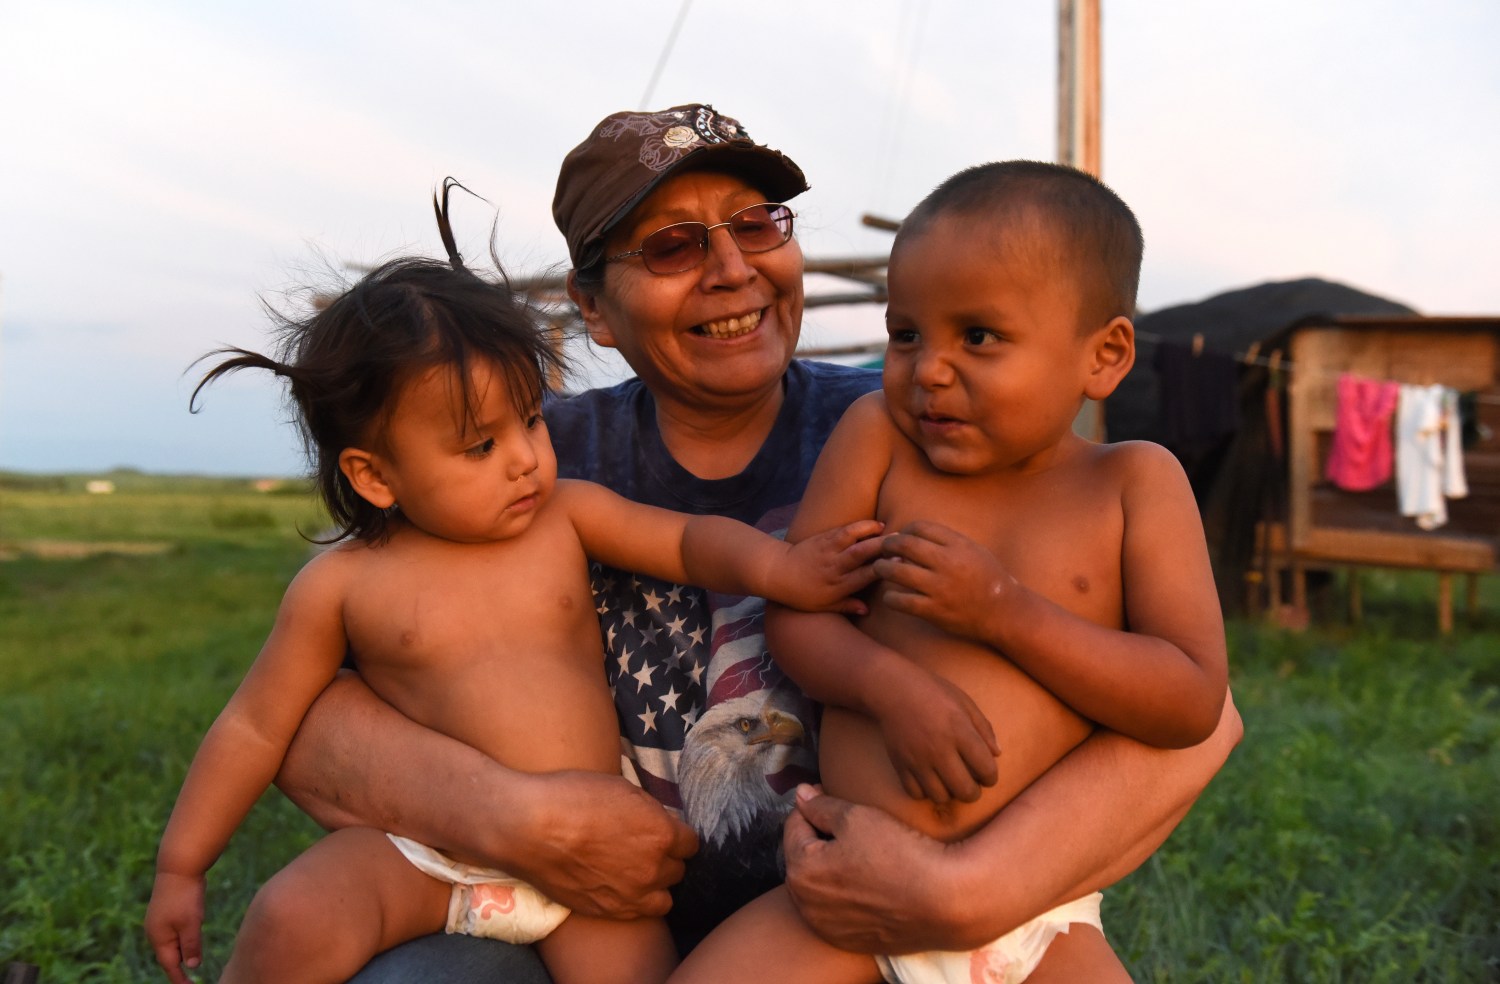 Beatrice Lookinghorse sits with two of her grandchildren, Linda Lookinghorse and Cody James Lookinghorse, in the backyard of her home on the Cheyenne River Reservation in Green Grass, South Dakota, U.S., May 28, 2018. Beatrice Lookinghorse is related to several of the Fort Laramie treaty riders who live with her. Beatrice also raises other children from the extended Lookinghorse family. "I promised my father that none of his grandkids would ever be put in the (foster care) system," she said. REUTERS/Stephanie Keith  SEARCH "KEITH ANNIVERSARY" FOR THIS STORY. SEARCH "WIDER IMAGE" FOR ALL STORIES. - RC1A57AAB7F0